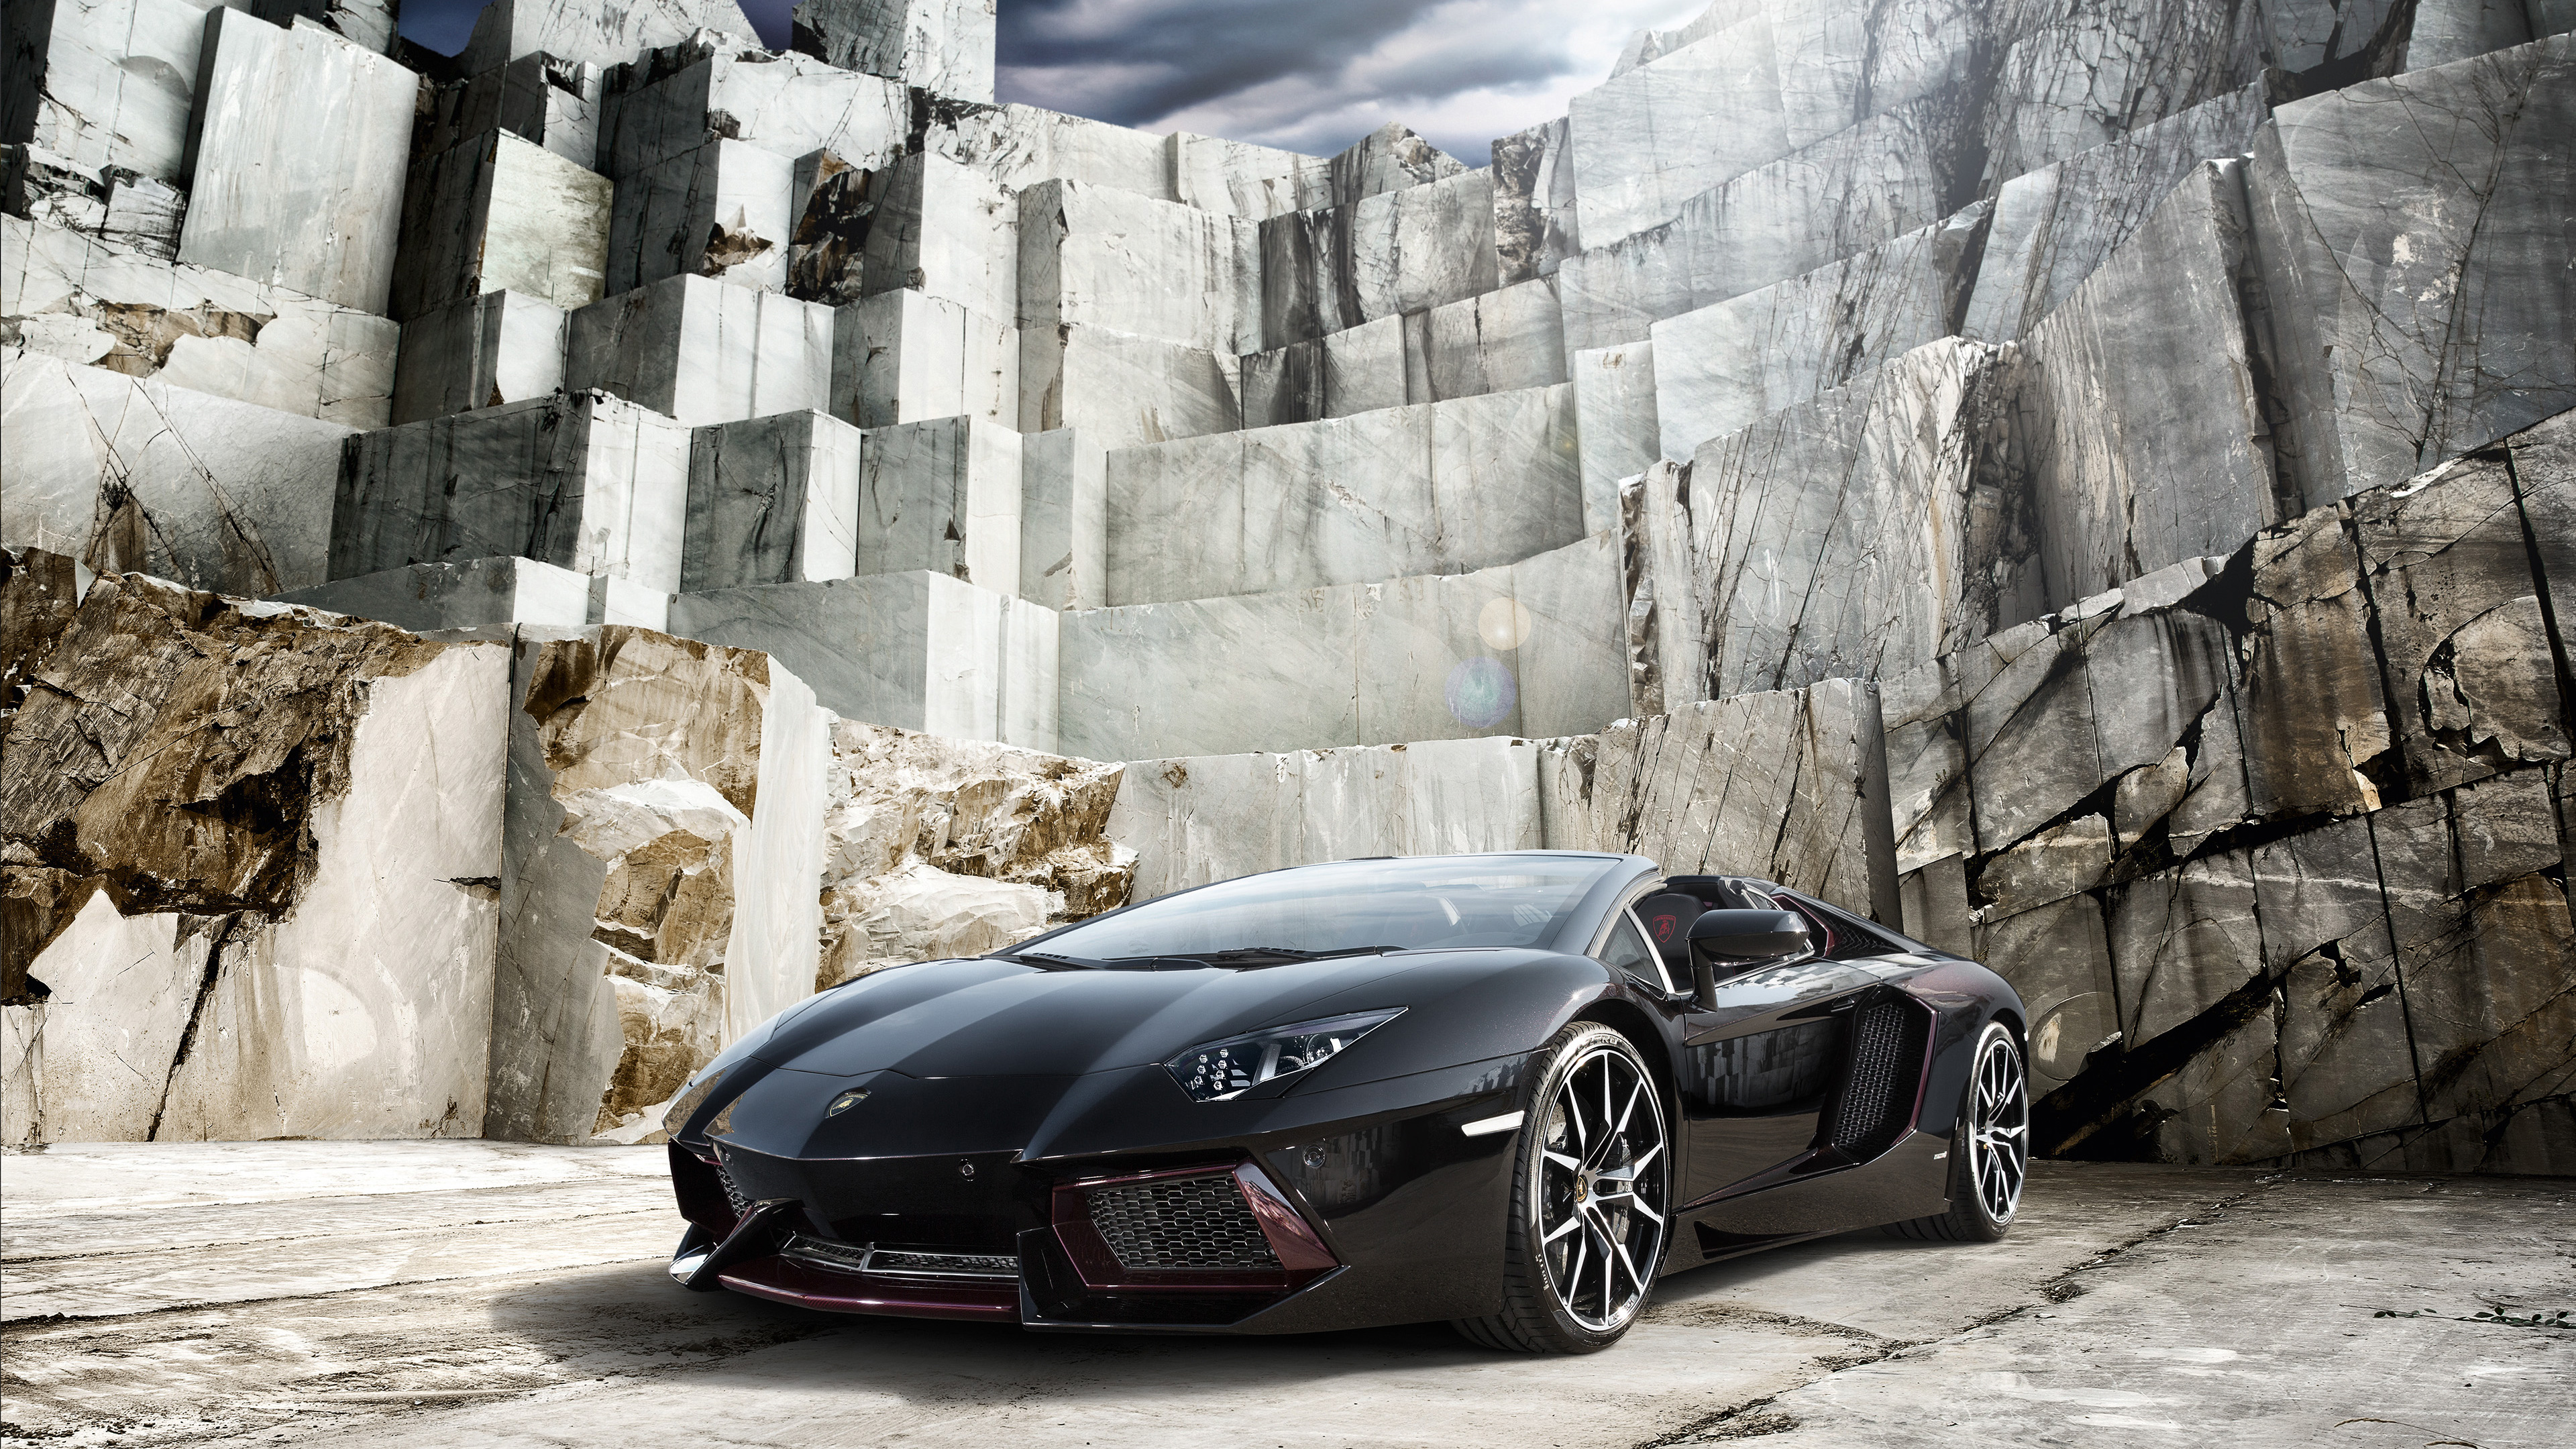 Black lamborghini aventador k hd cars k wallpapers images backgrounds photos and pictures